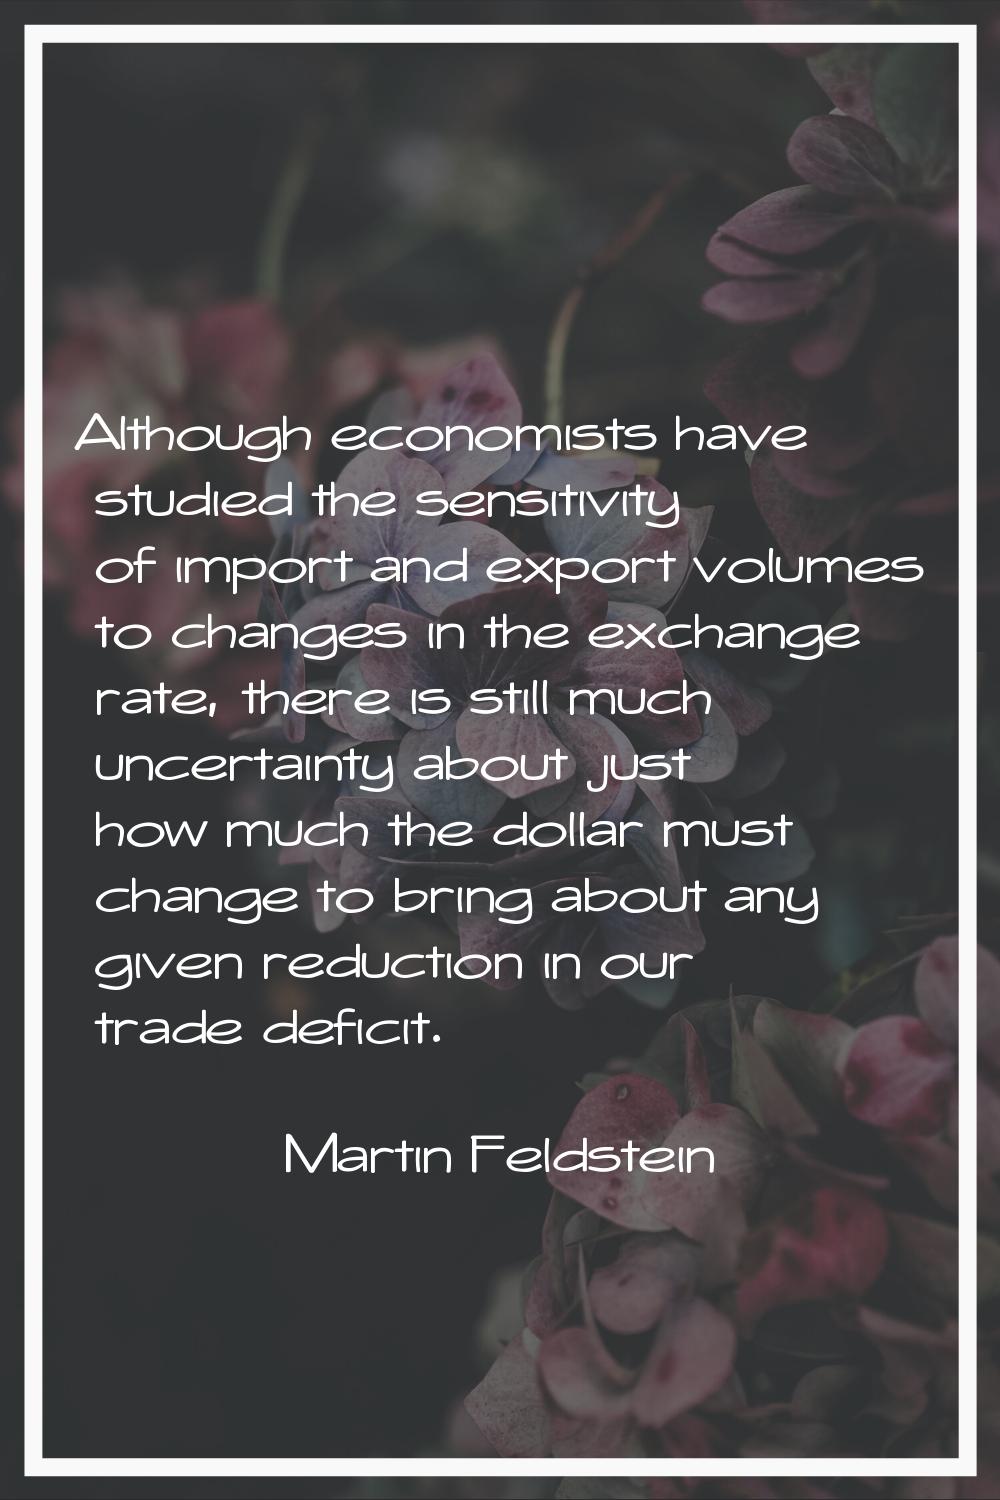 Although economists have studied the sensitivity of import and export volumes to changes in the exc